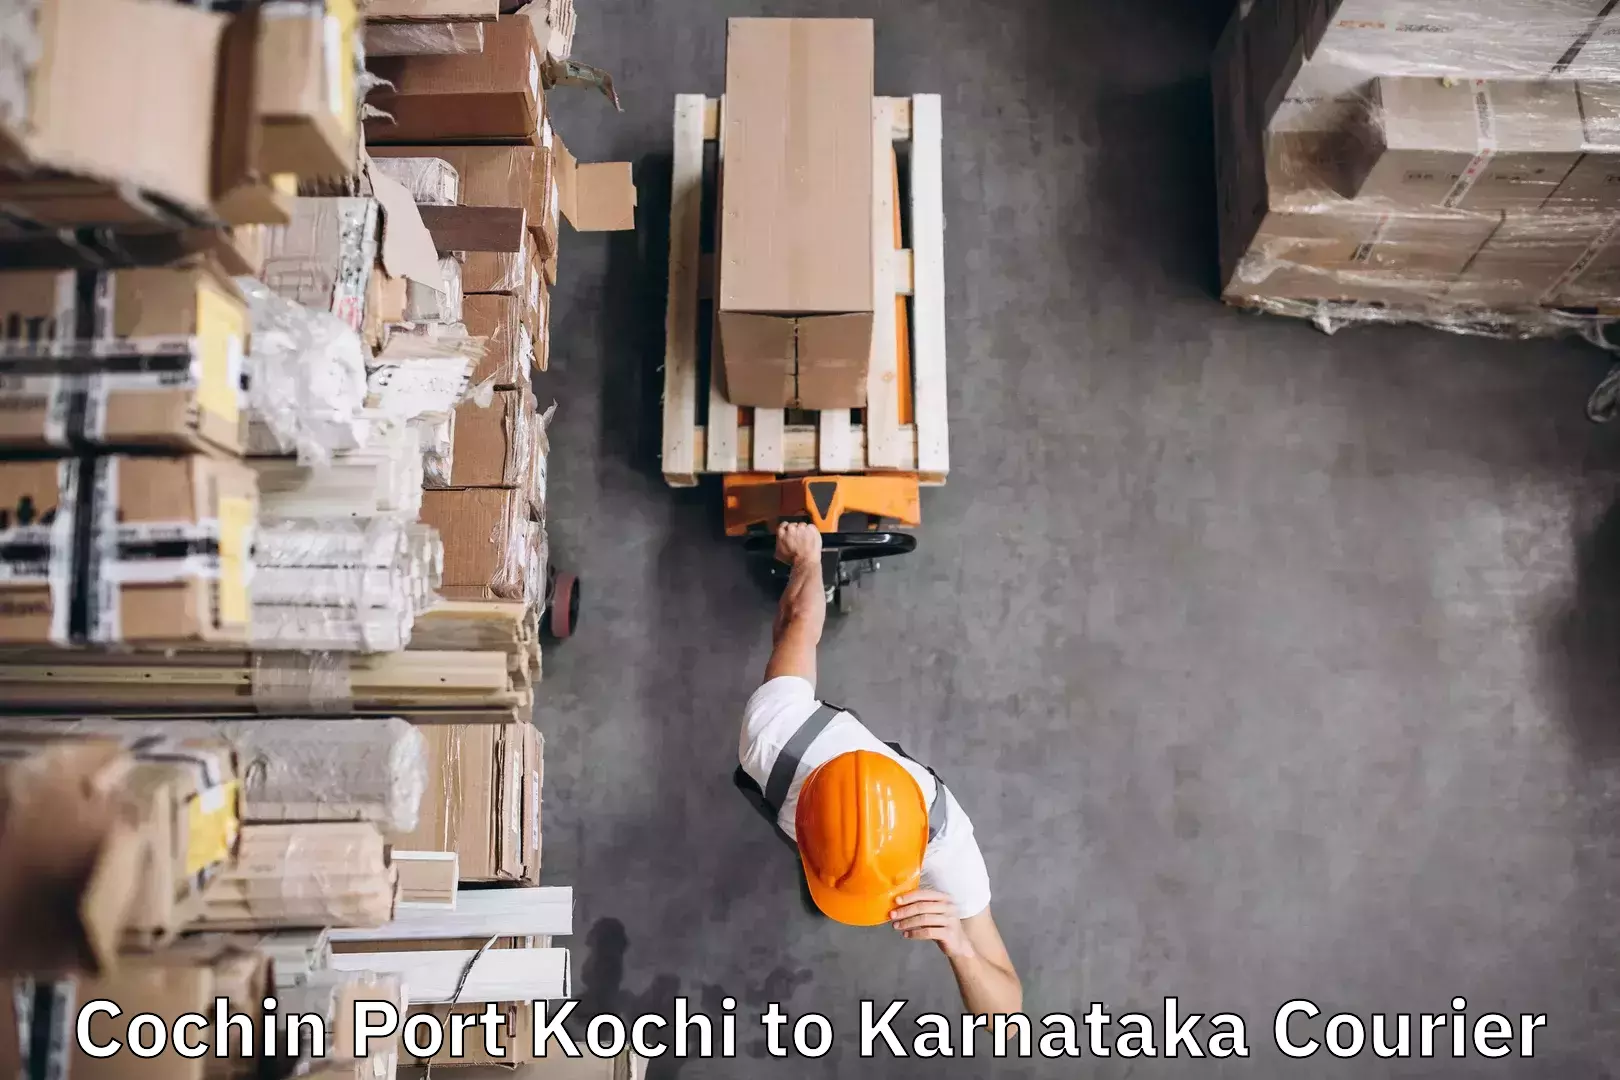 Baggage delivery management Cochin Port Kochi to Rona Gadag